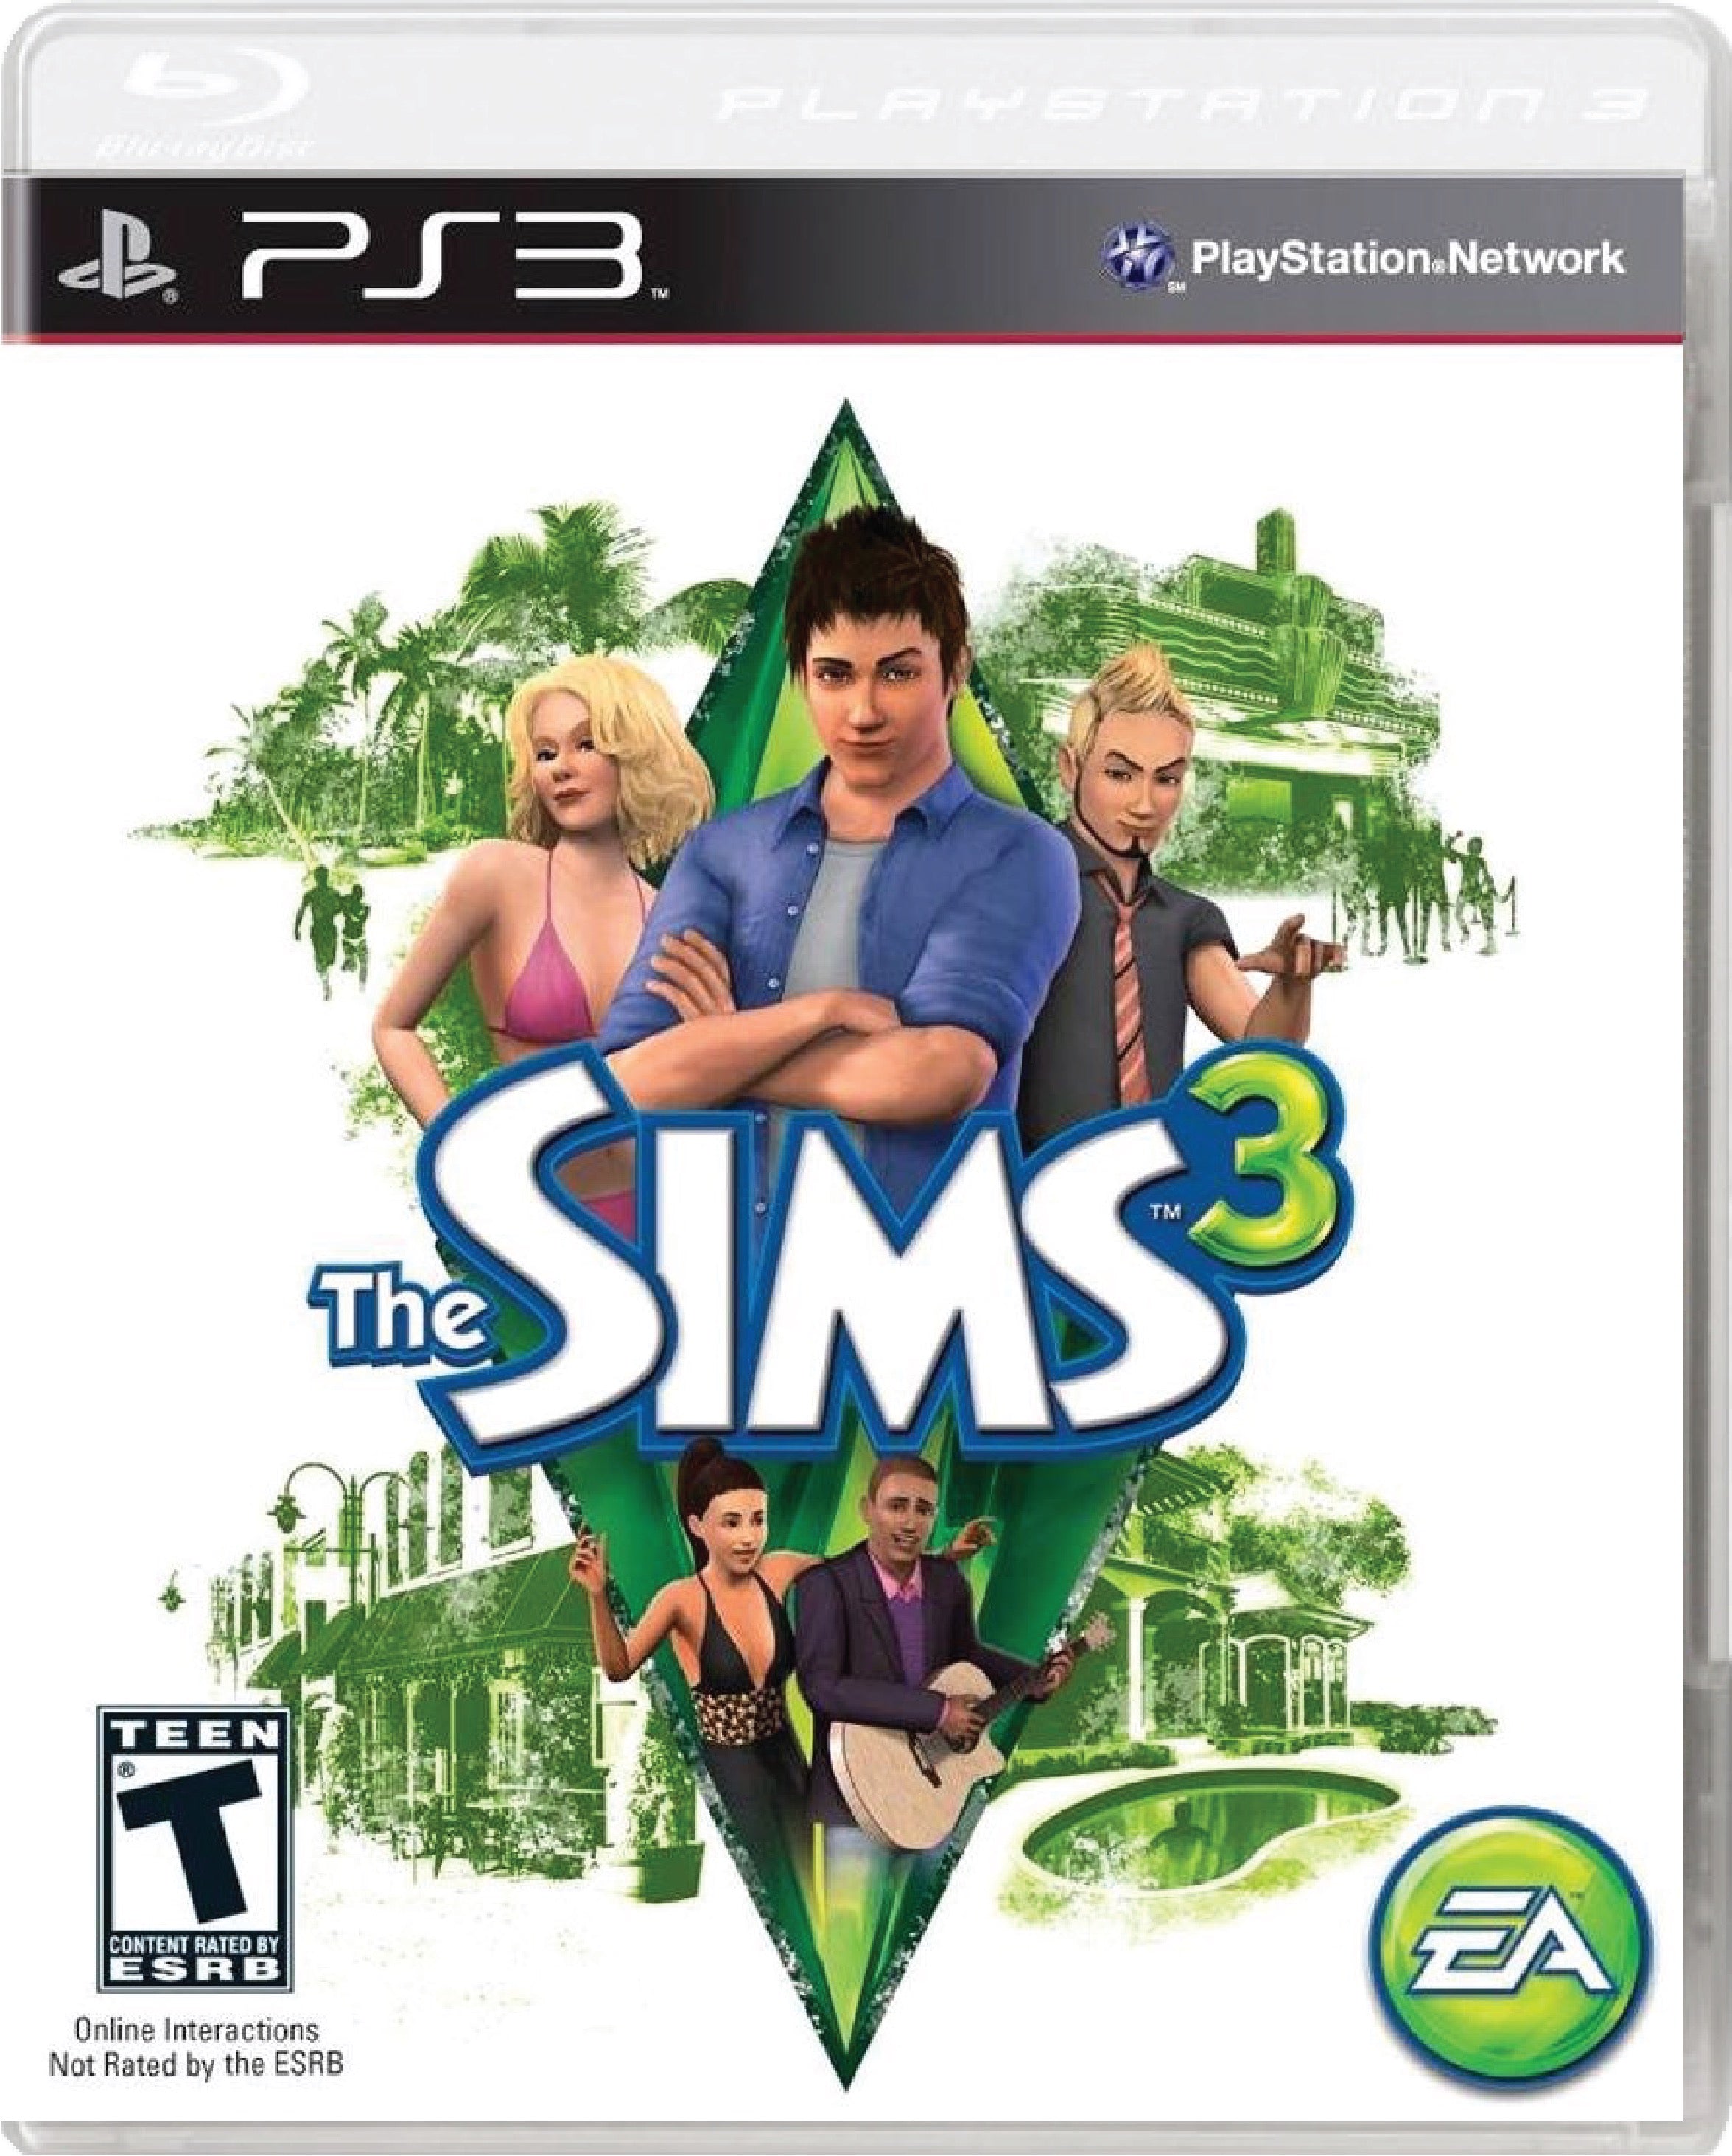 The Sims 3 Cover Art